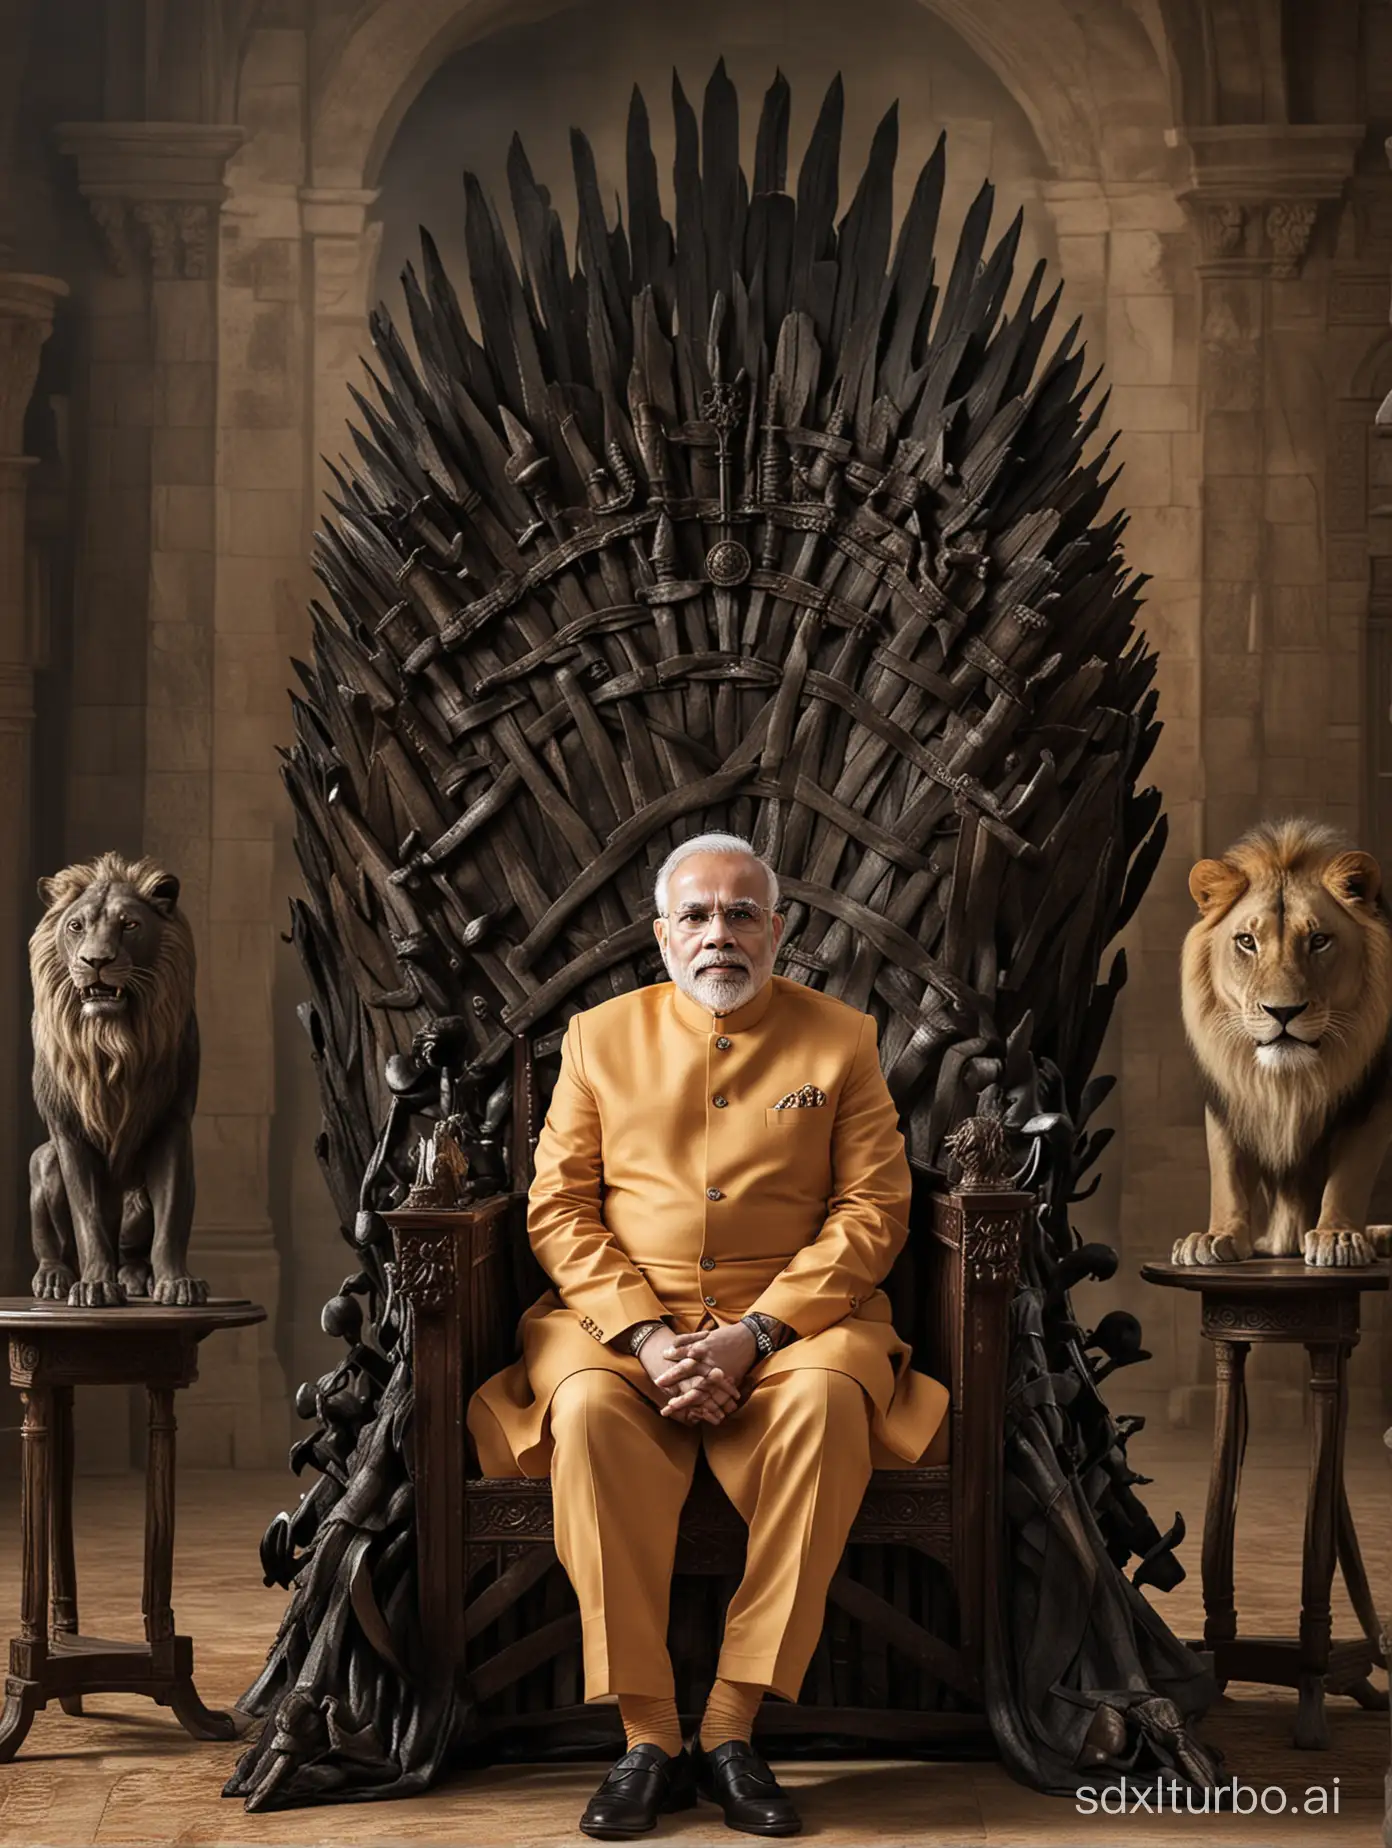 Narendra Modi sitting on a game of thrones chair with a lion on the left side of the chair